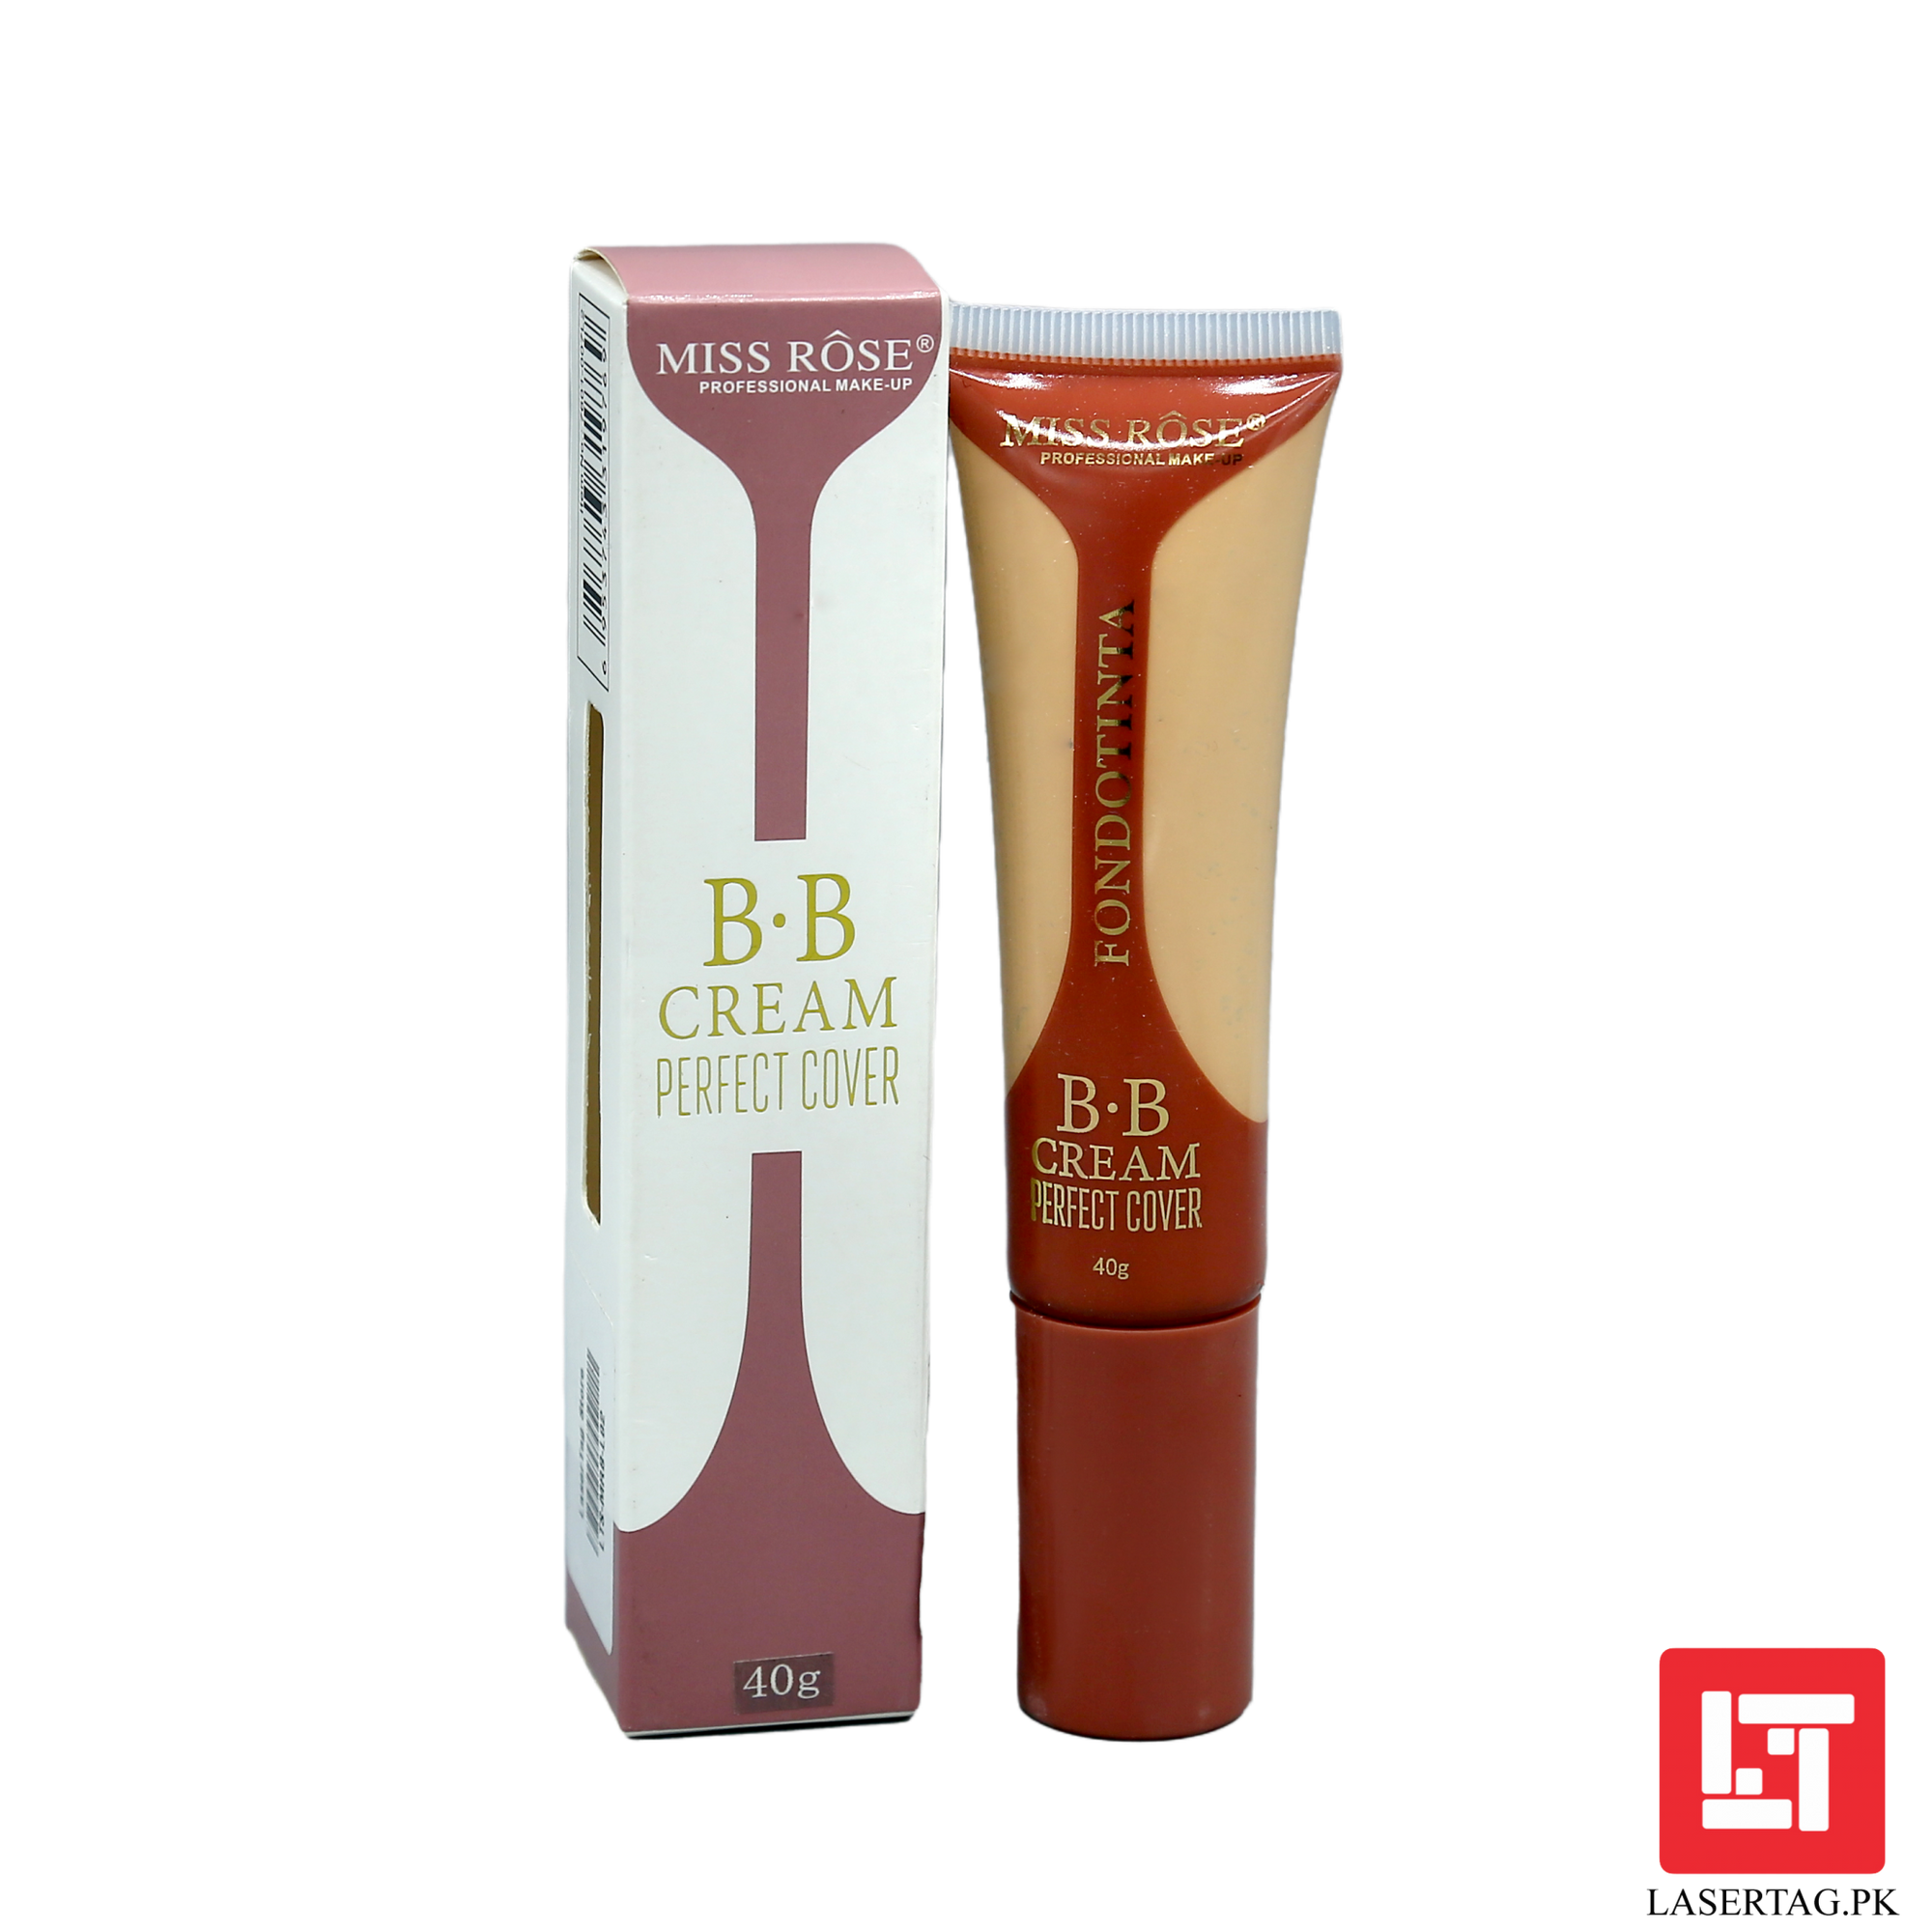 Miss Rose BB Cream Perfect Cover 40g freeshipping - lasertag.pk